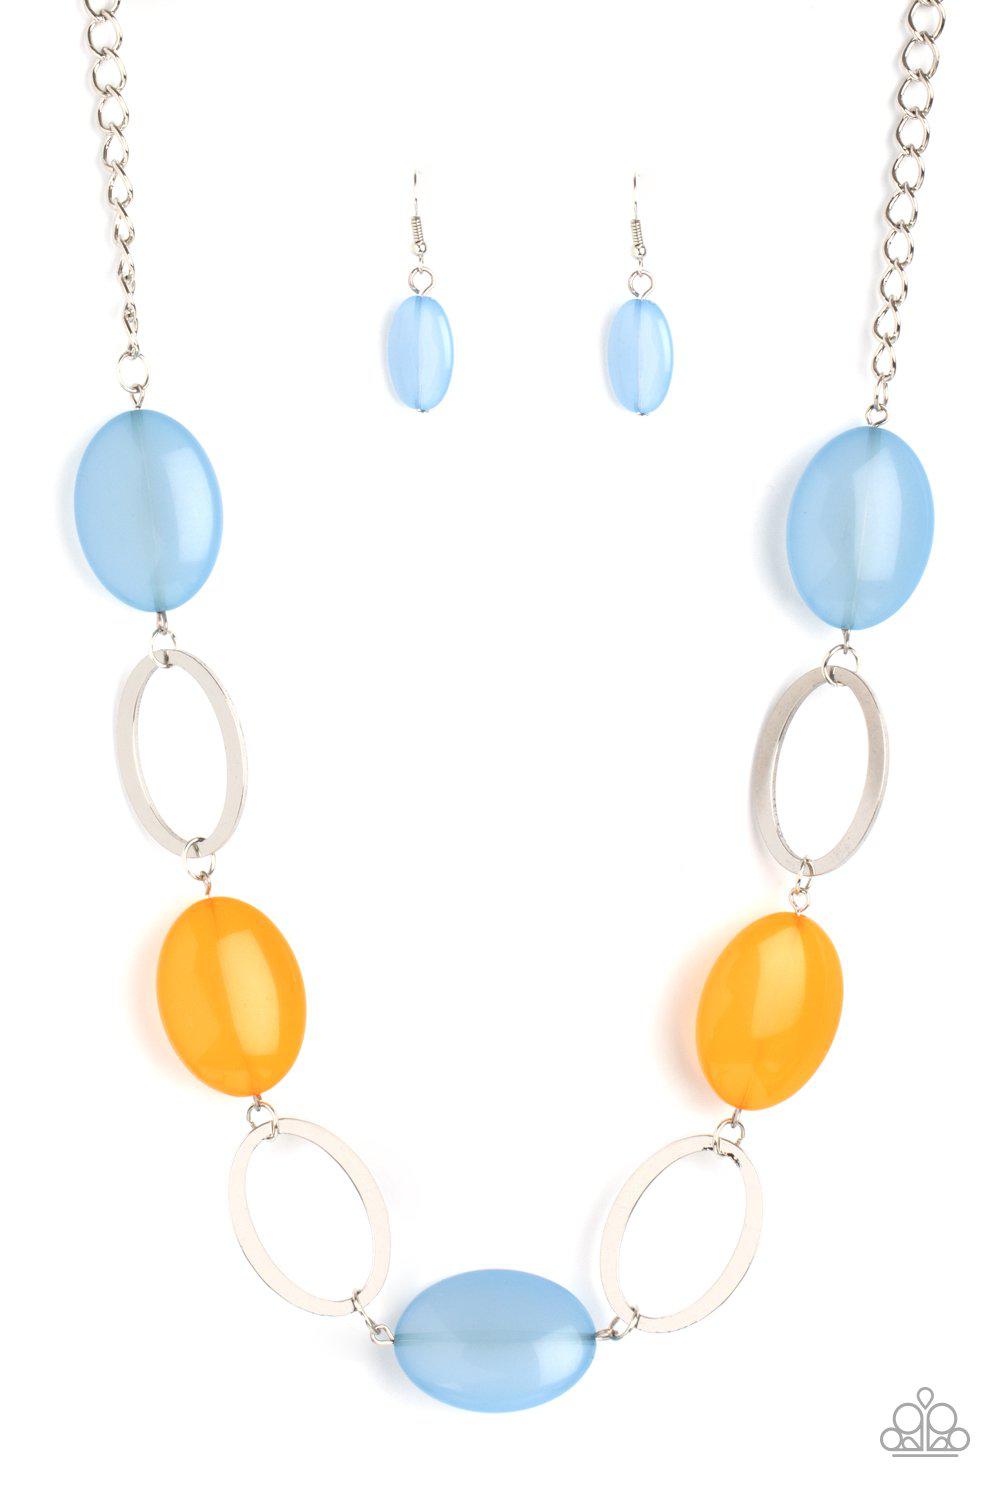 Beachside Boardwalk Multi-color Blue and Orange Necklace - Paparazzi Accessories- lightbox - CarasShop.com - $5 Jewelry by Cara Jewels